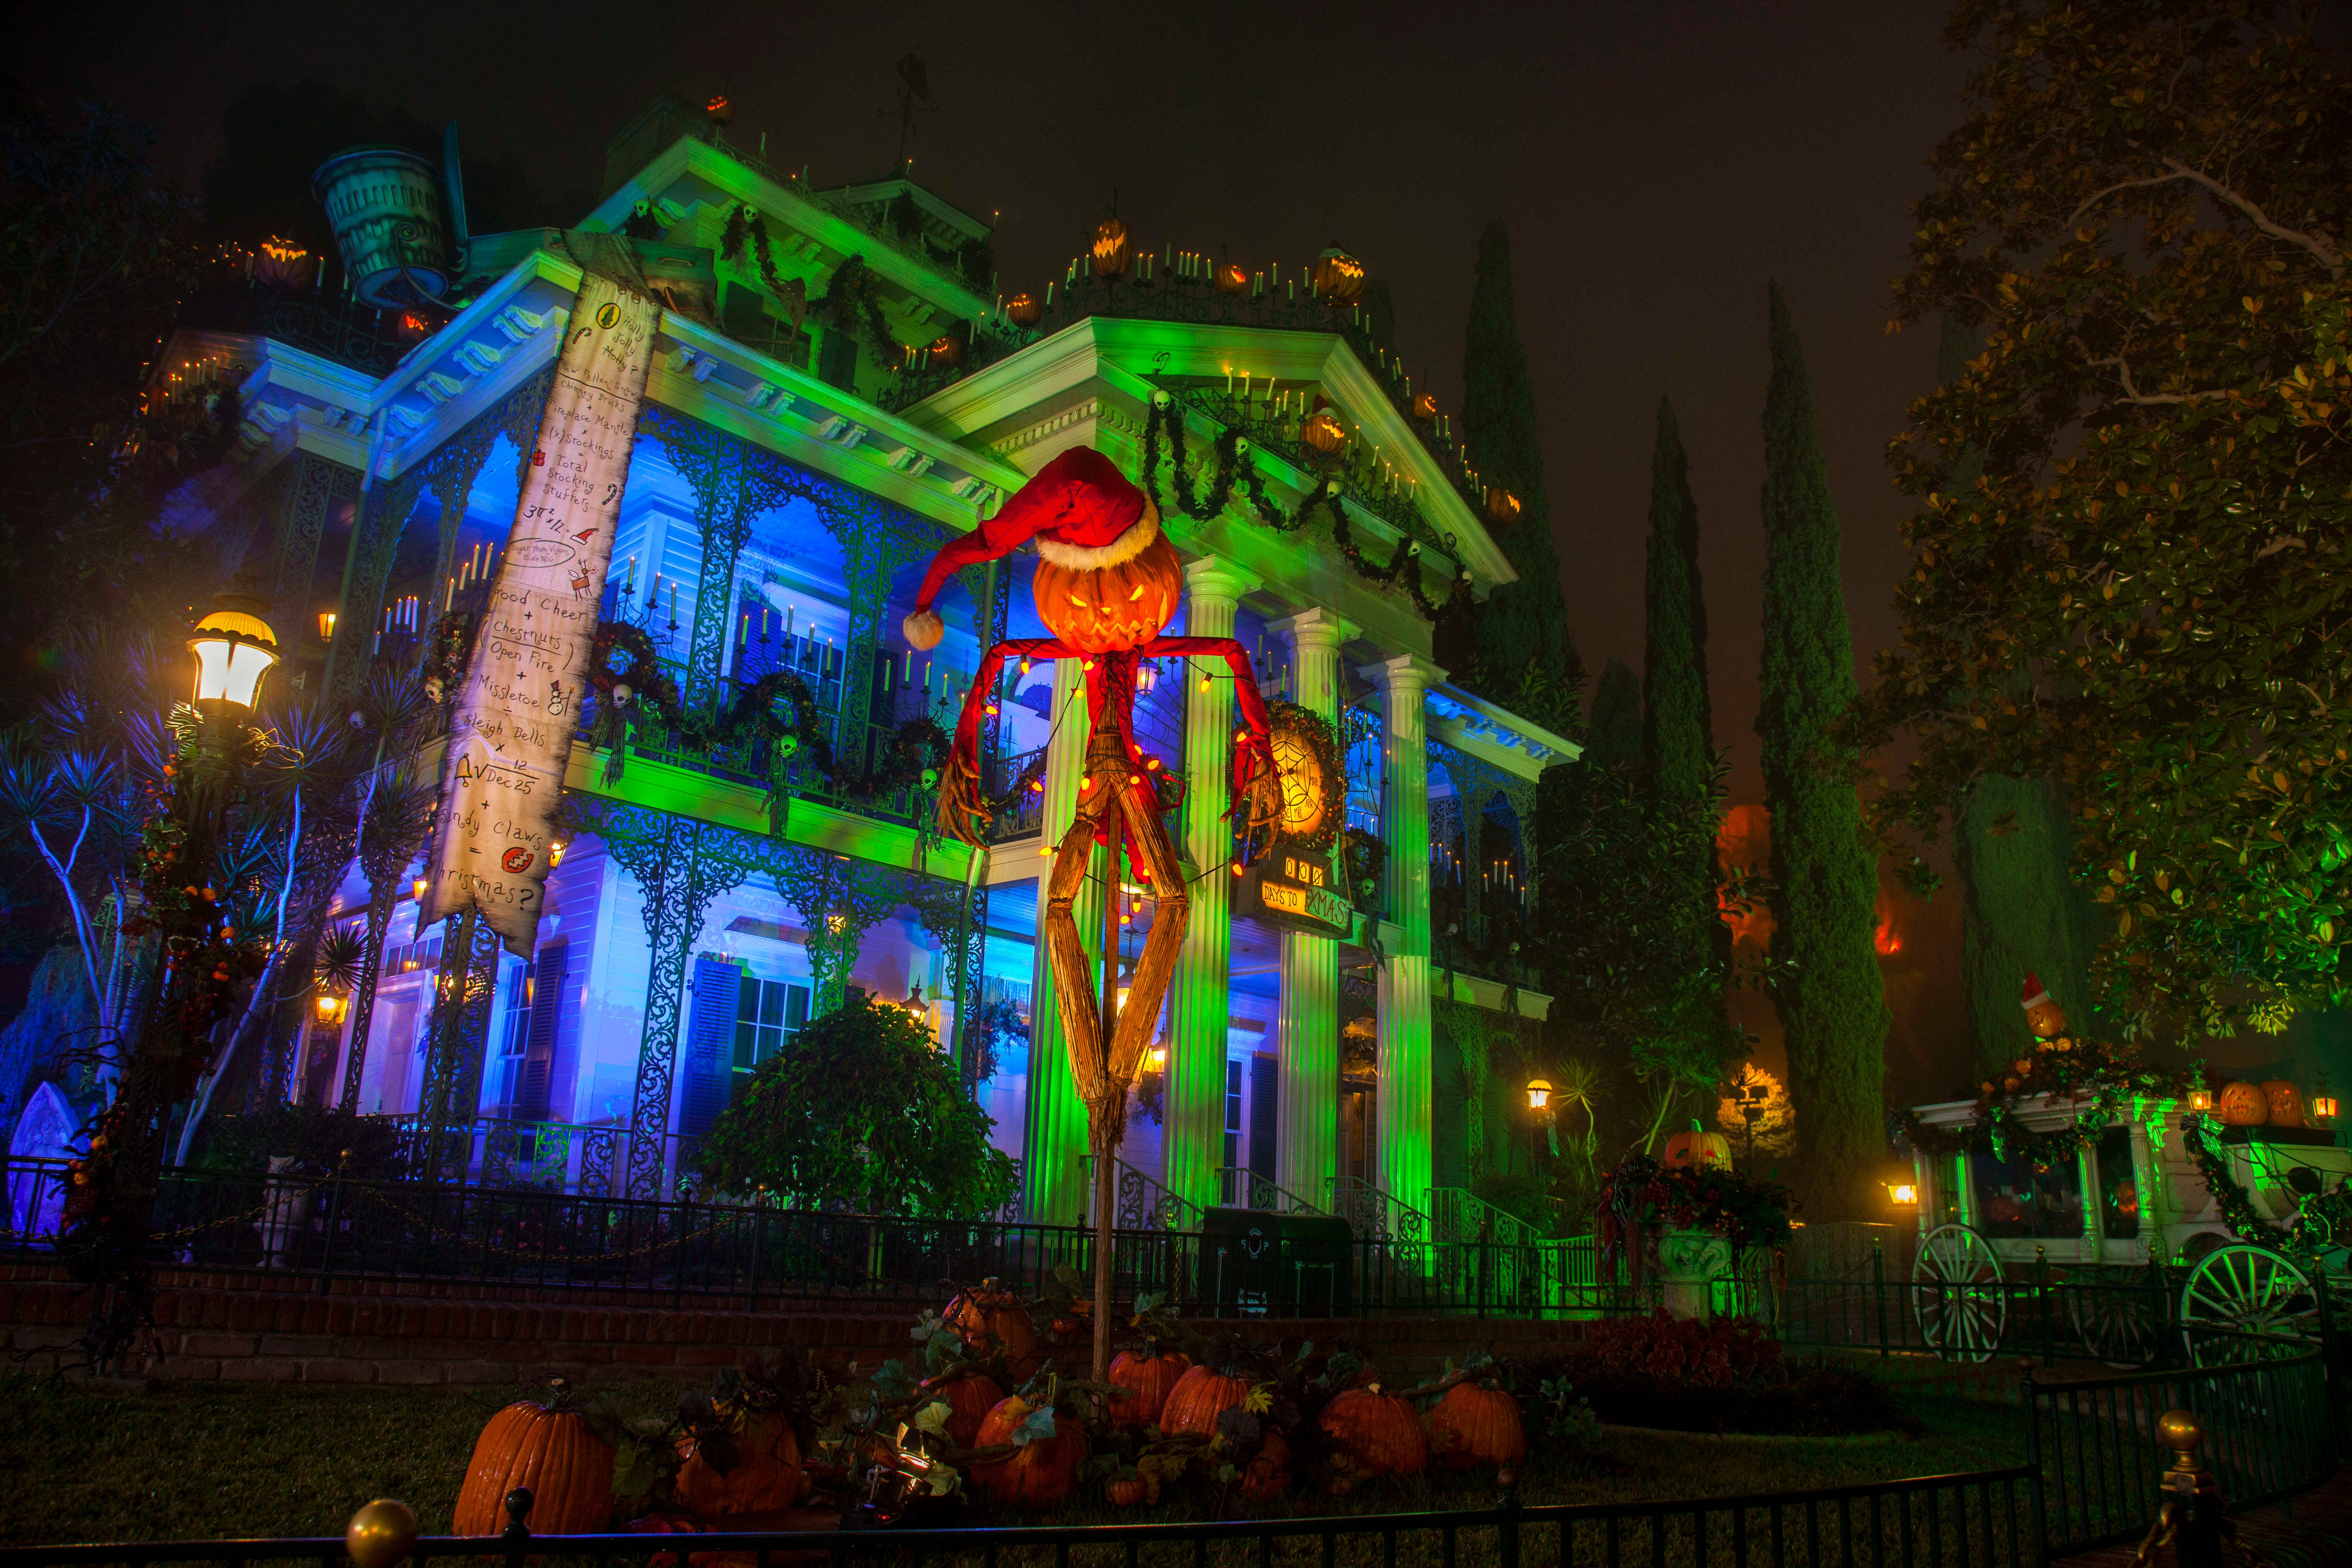 After 6 months of closure, Disneyland's Haunted Mansion Holiday returns with new designs